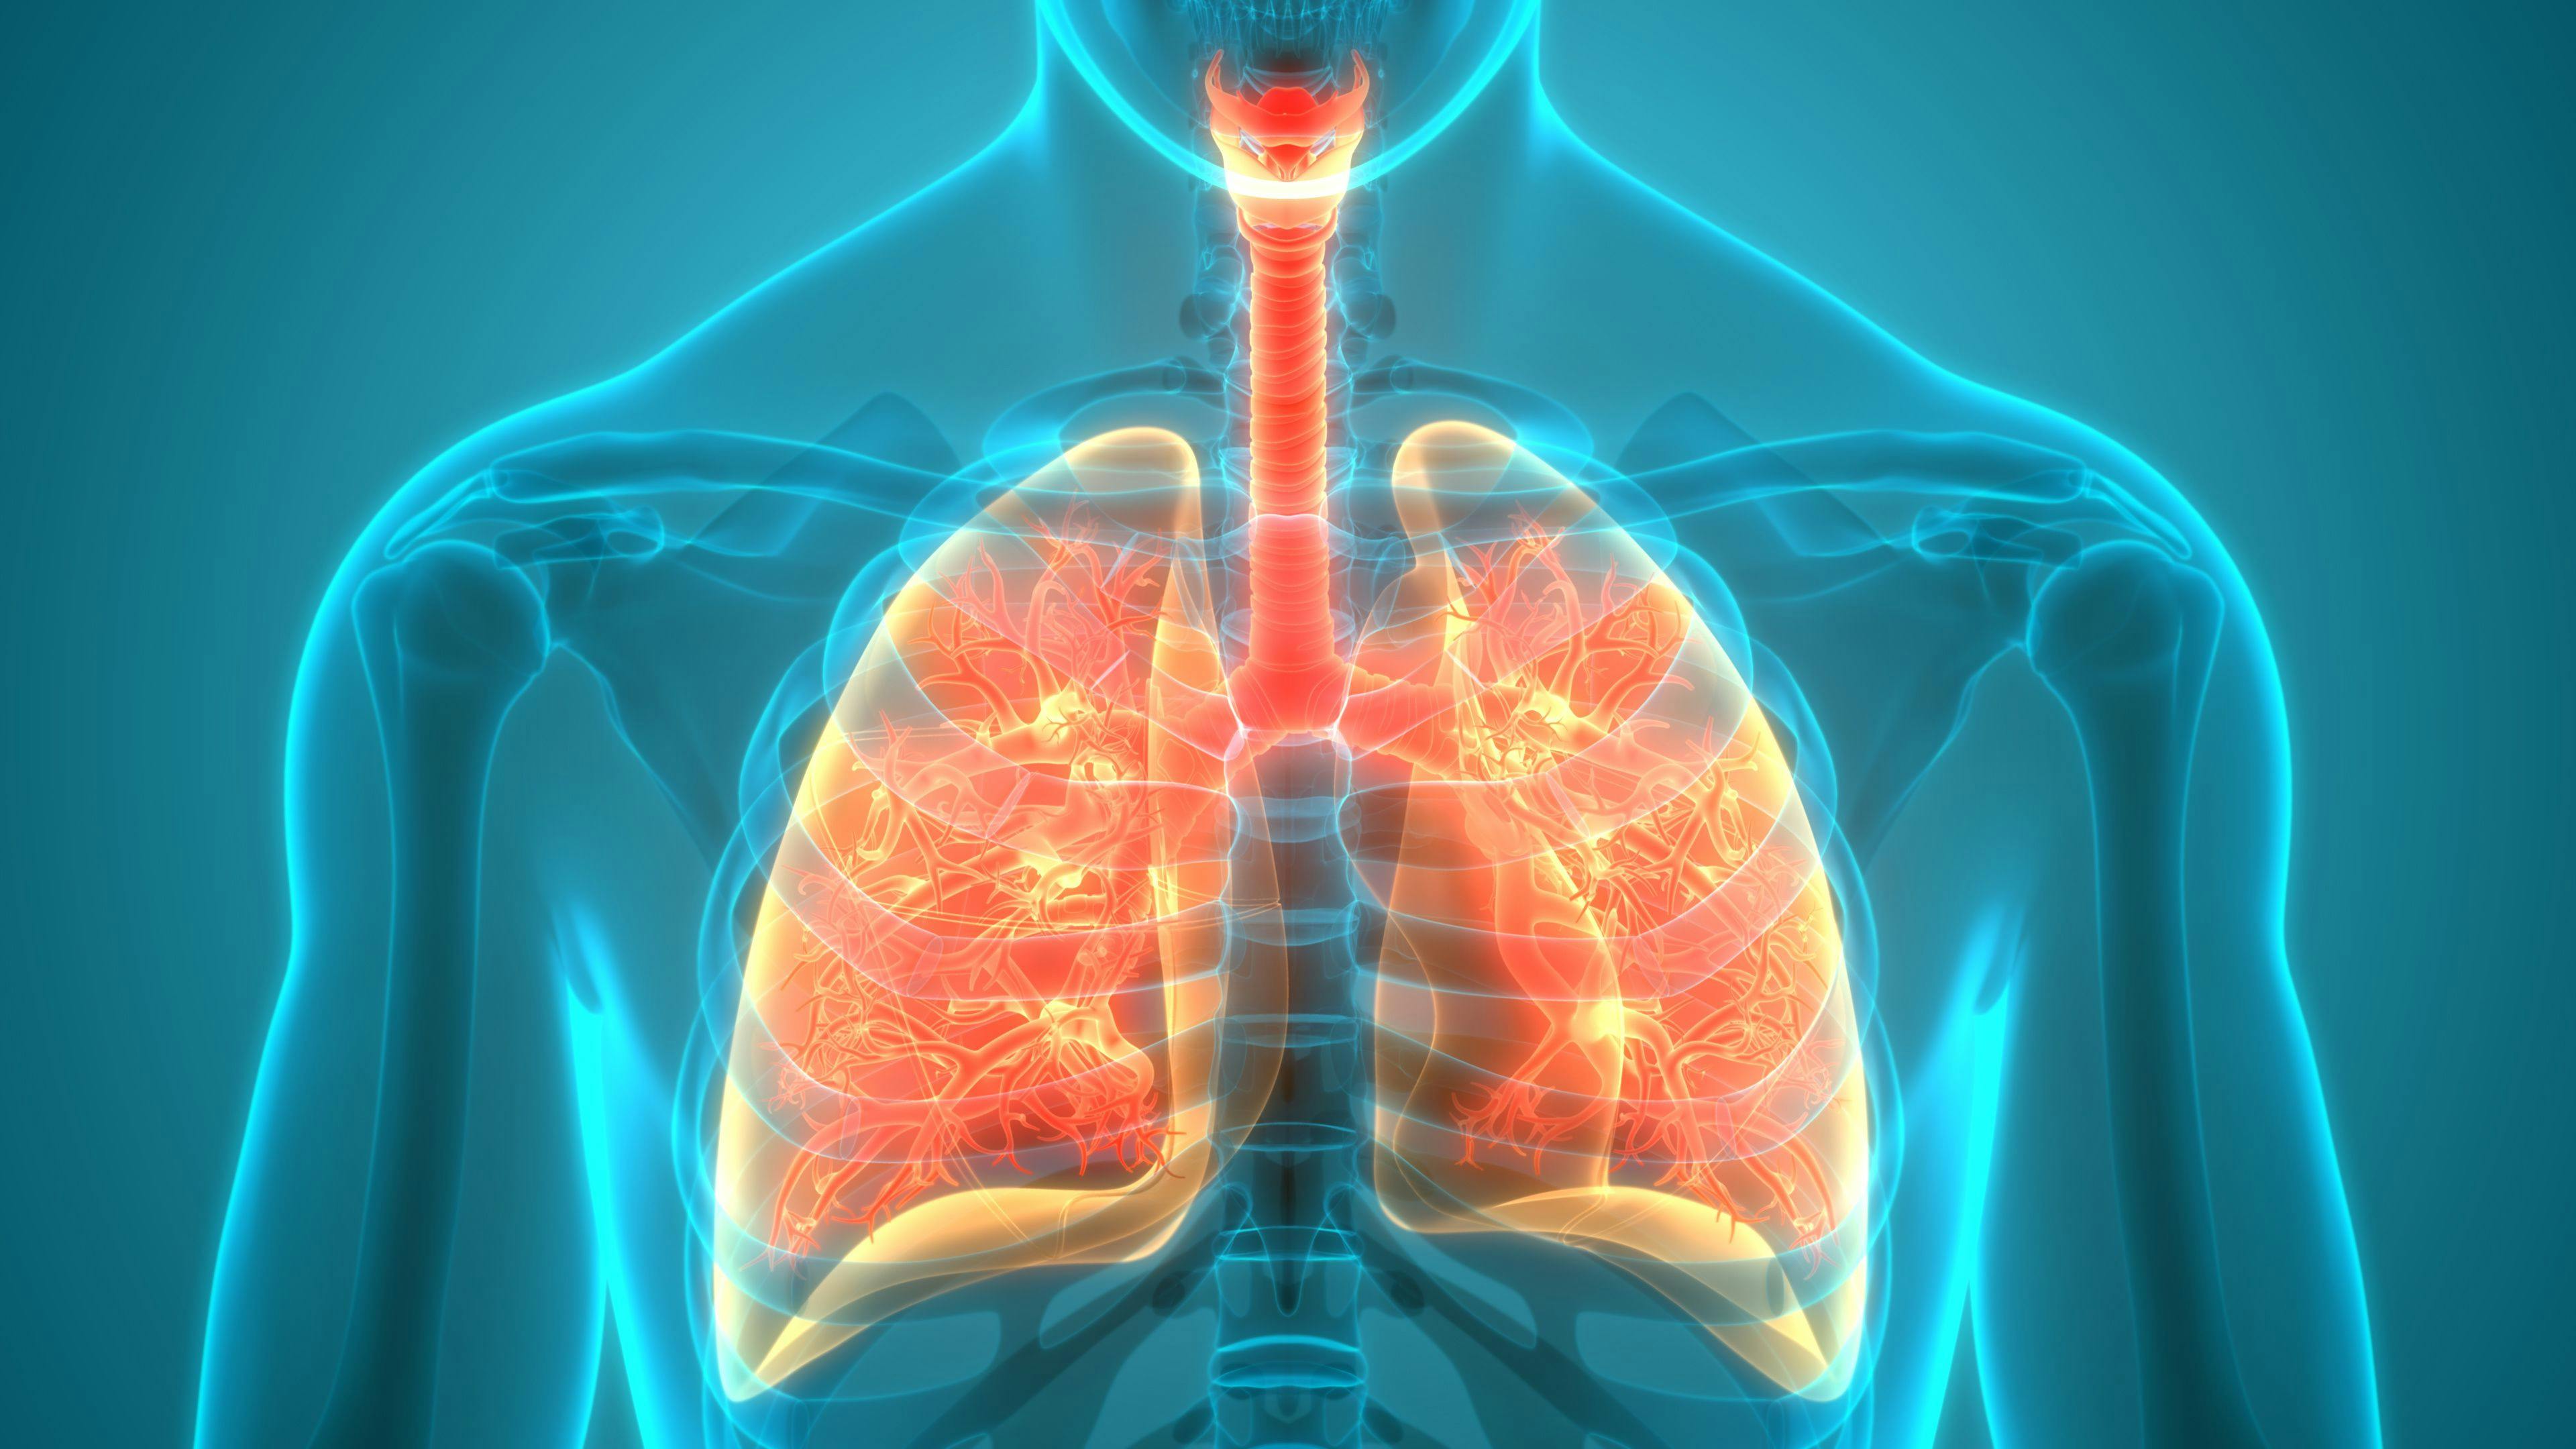 The decision to approve durvalumab plus tremelimumab in Japan for patients with advanced non–small cell lung cancer and unresectable biliary tract cancer and liver cancer was based on data from several phase 3 studies.